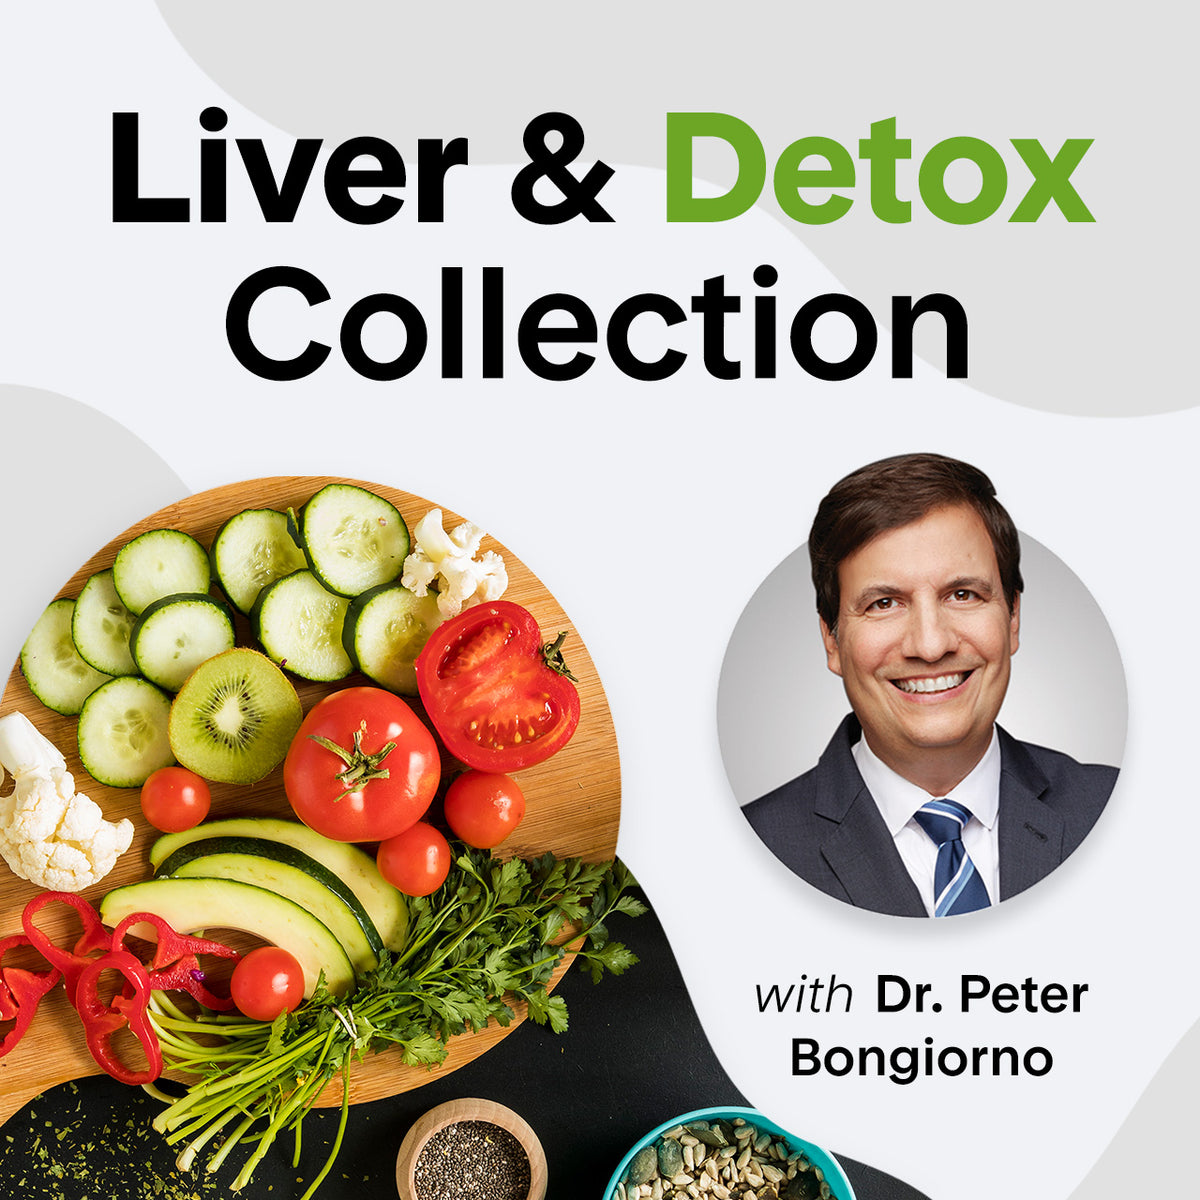 The Liver & Detox Collection